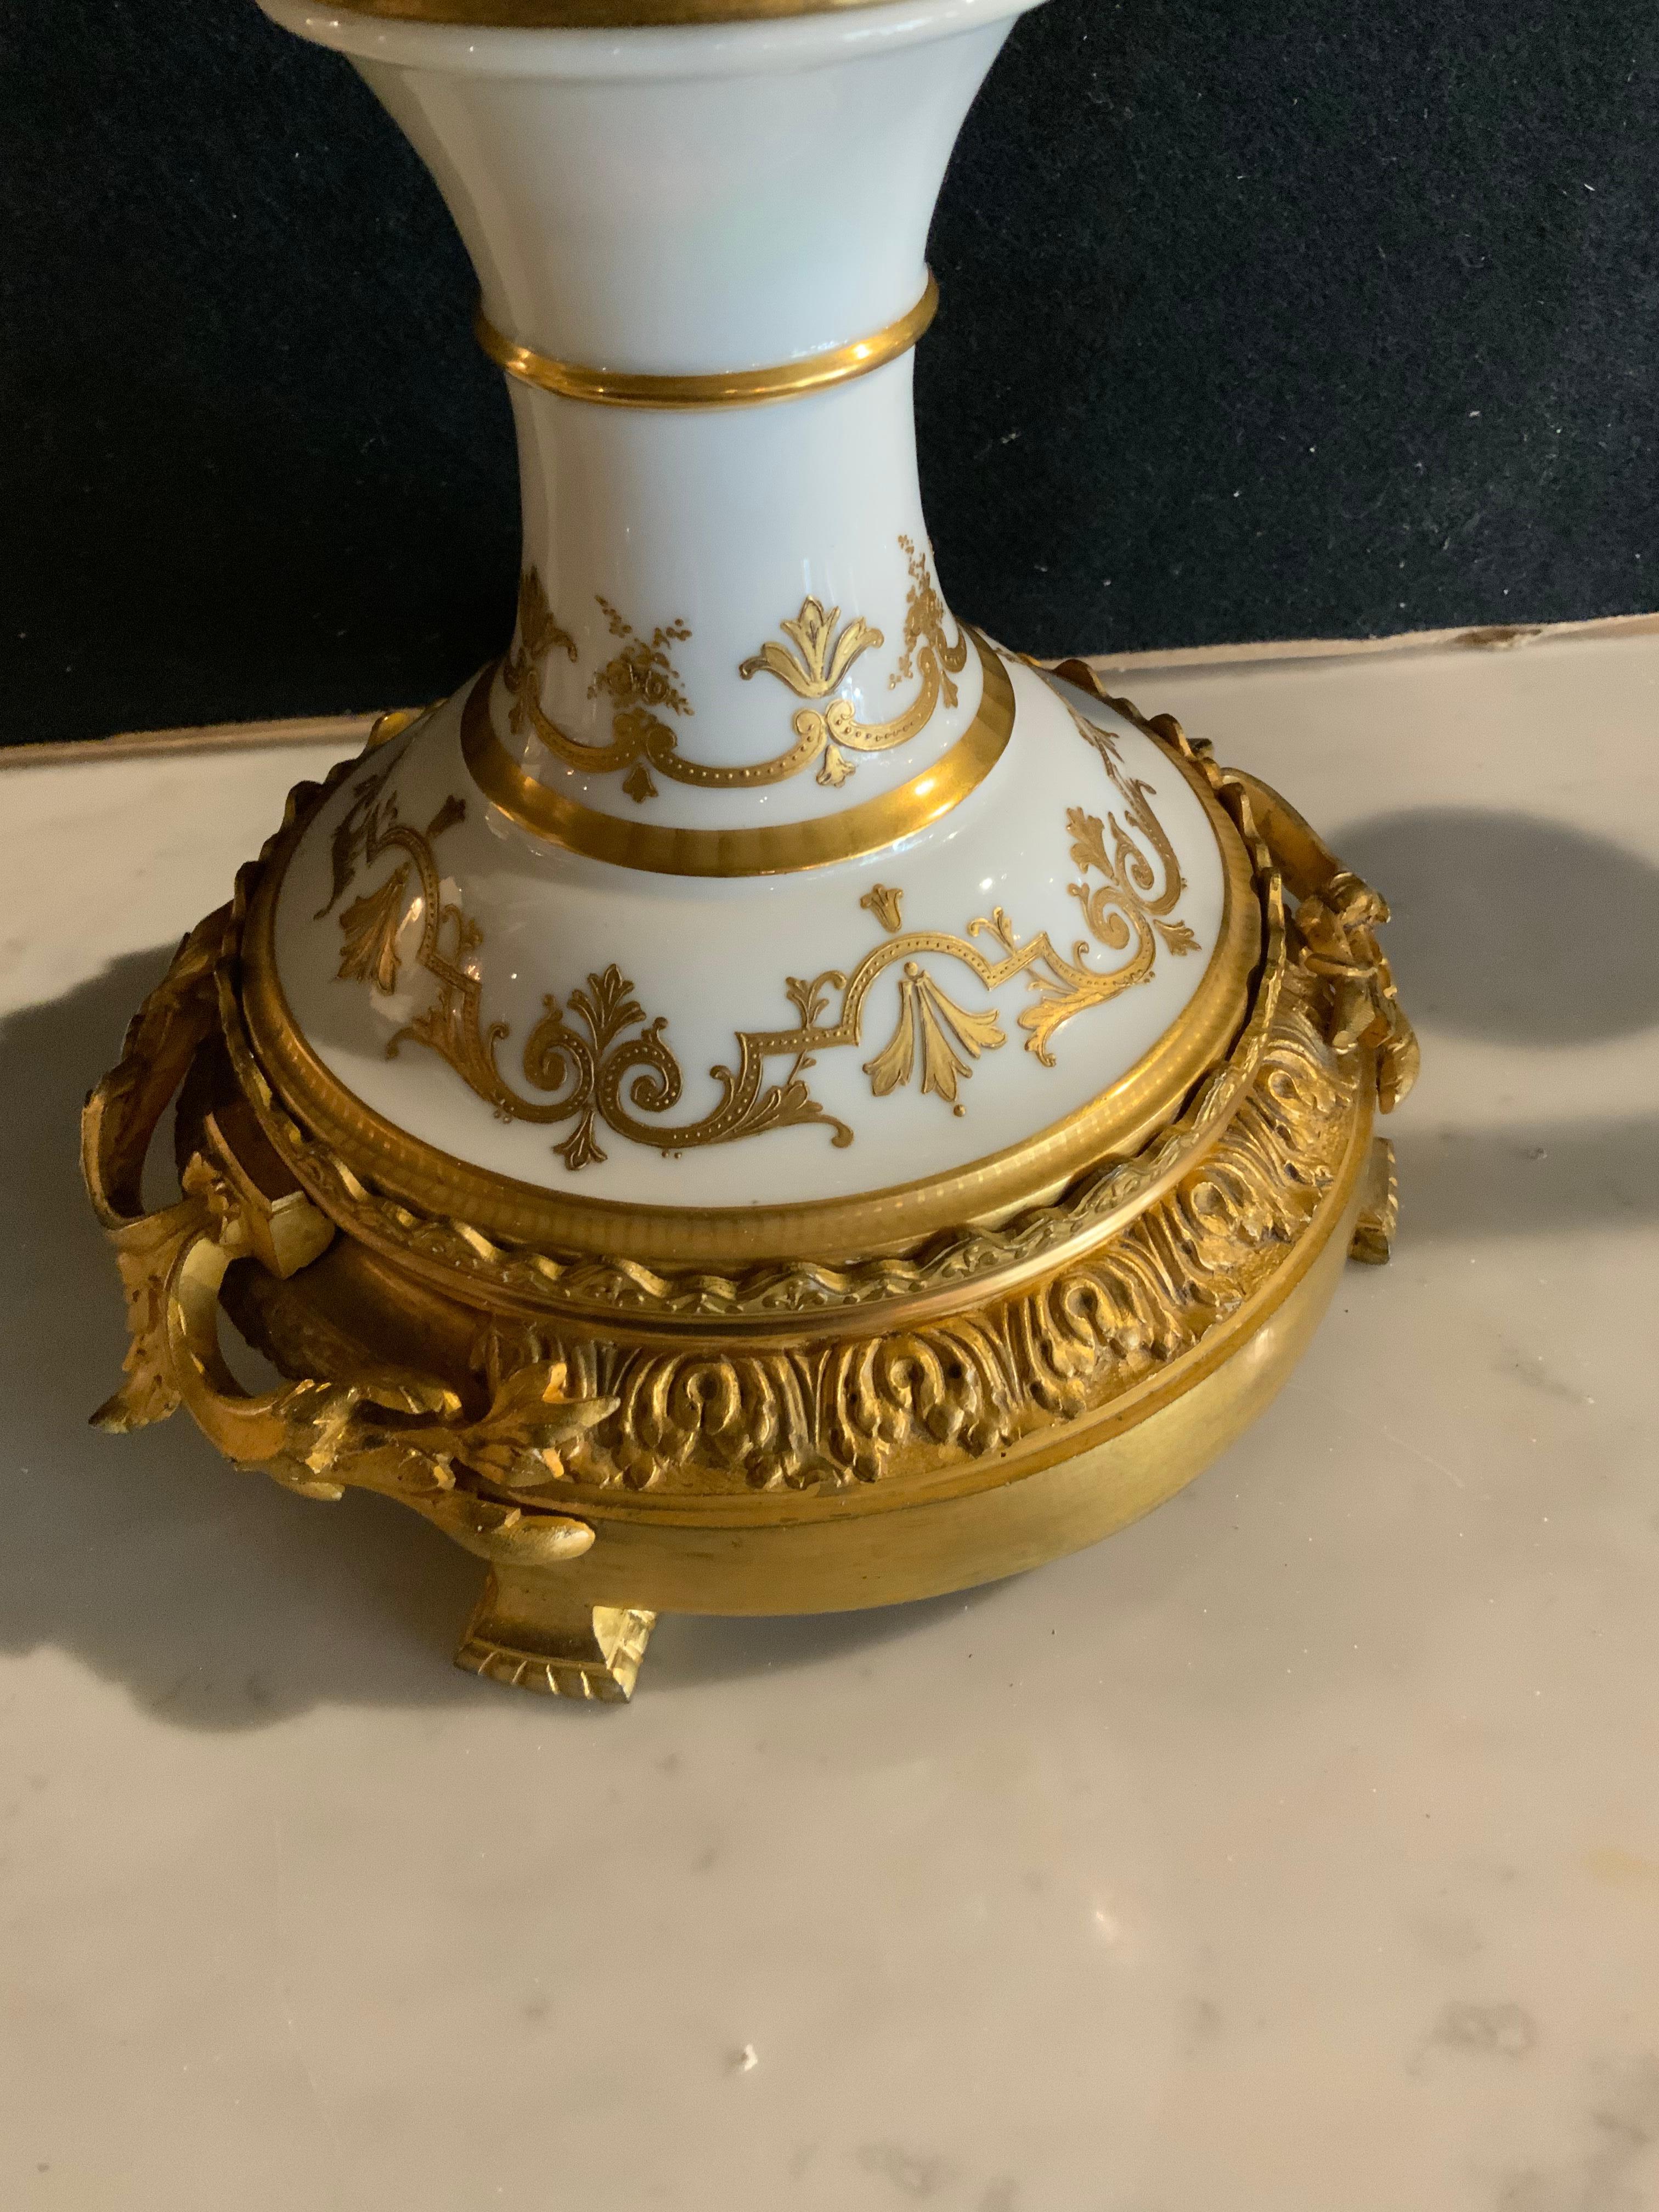 Porcelain Sevres Urn 19 Th Century with Gilt Bronze Mounts and Gilt Masks, Hand Painted